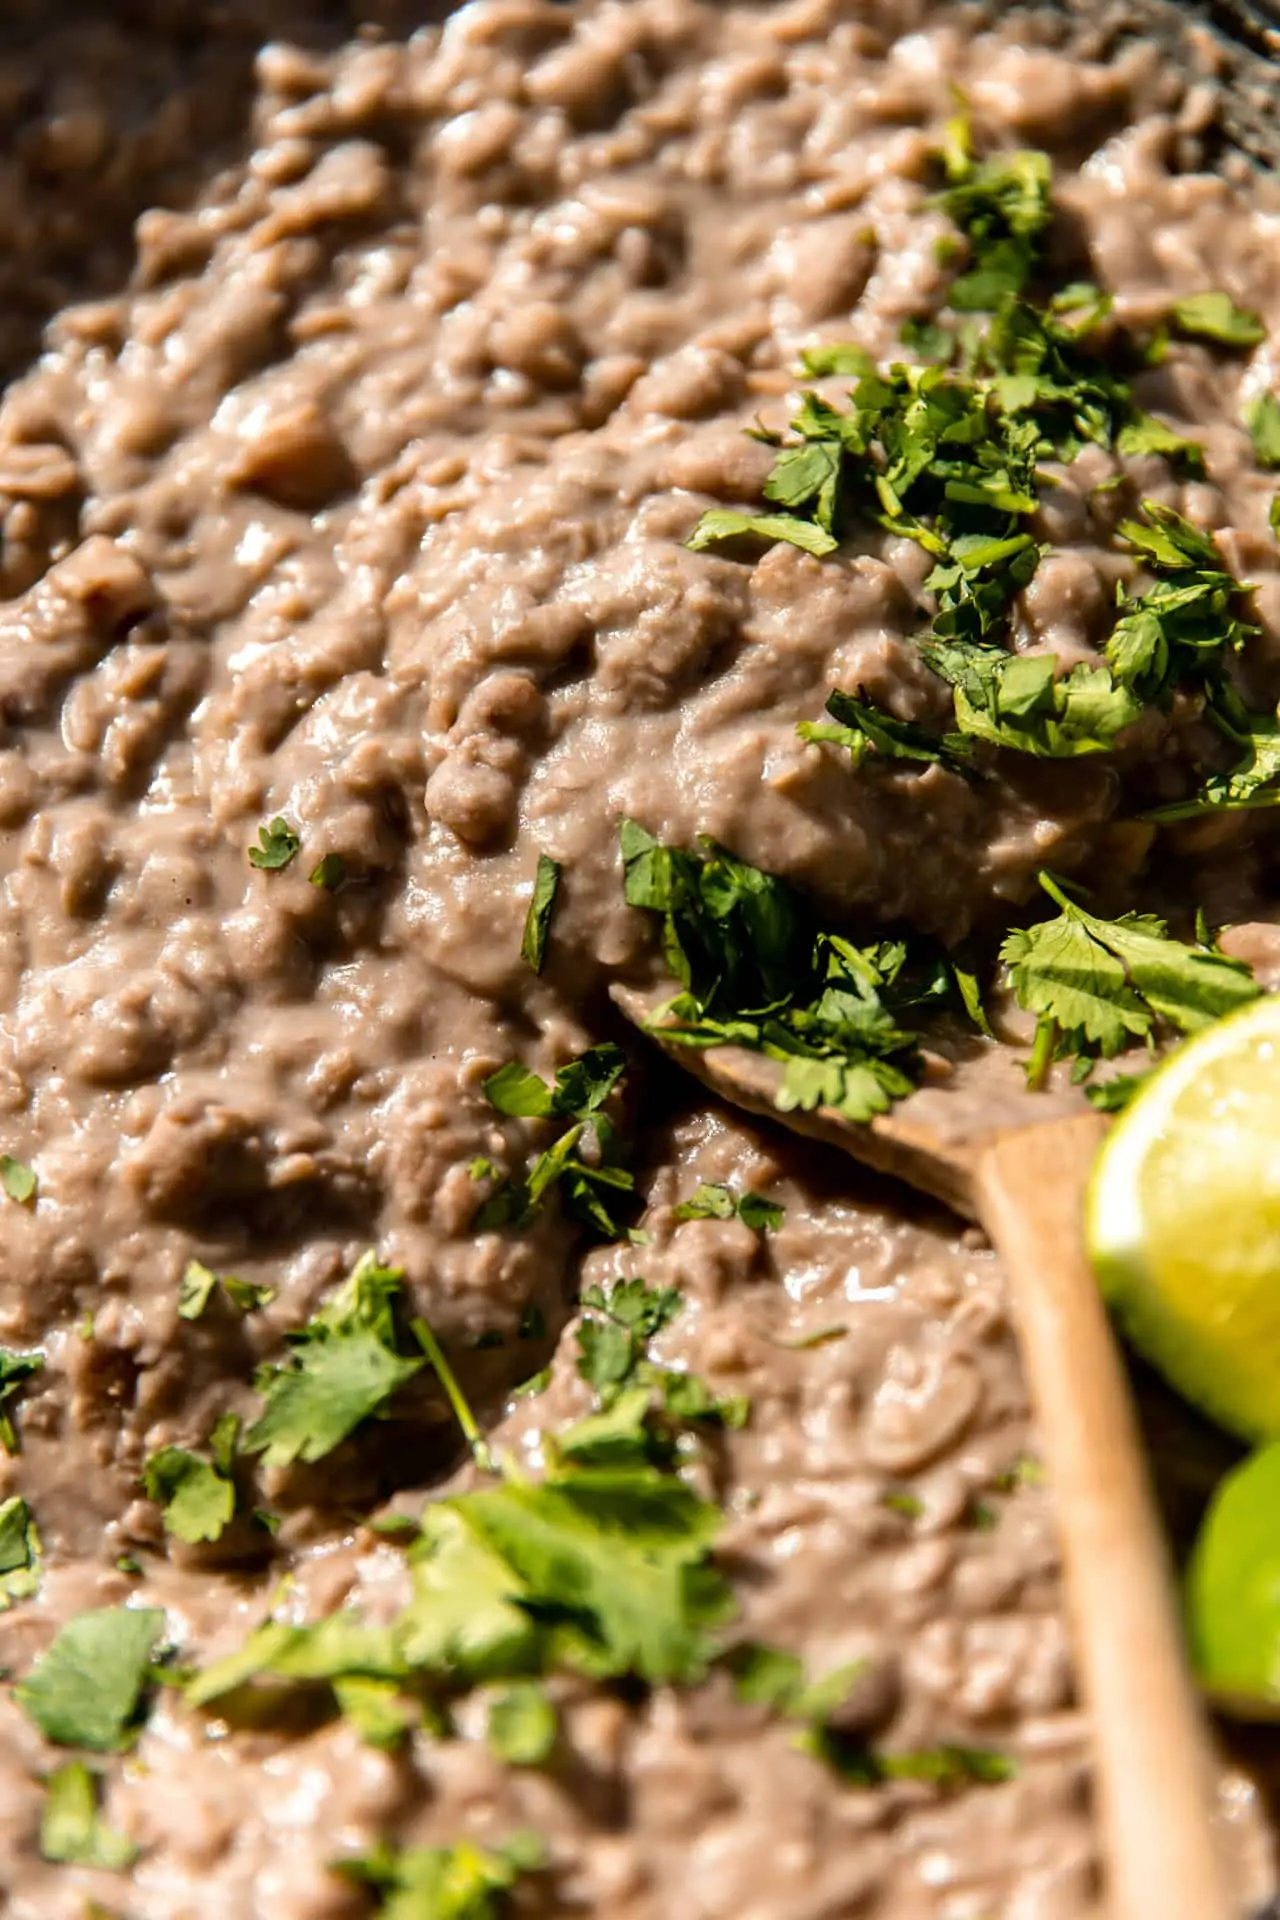 Spoon scooping up thick and creamy refried beans topped with cilantro and lime wedges.